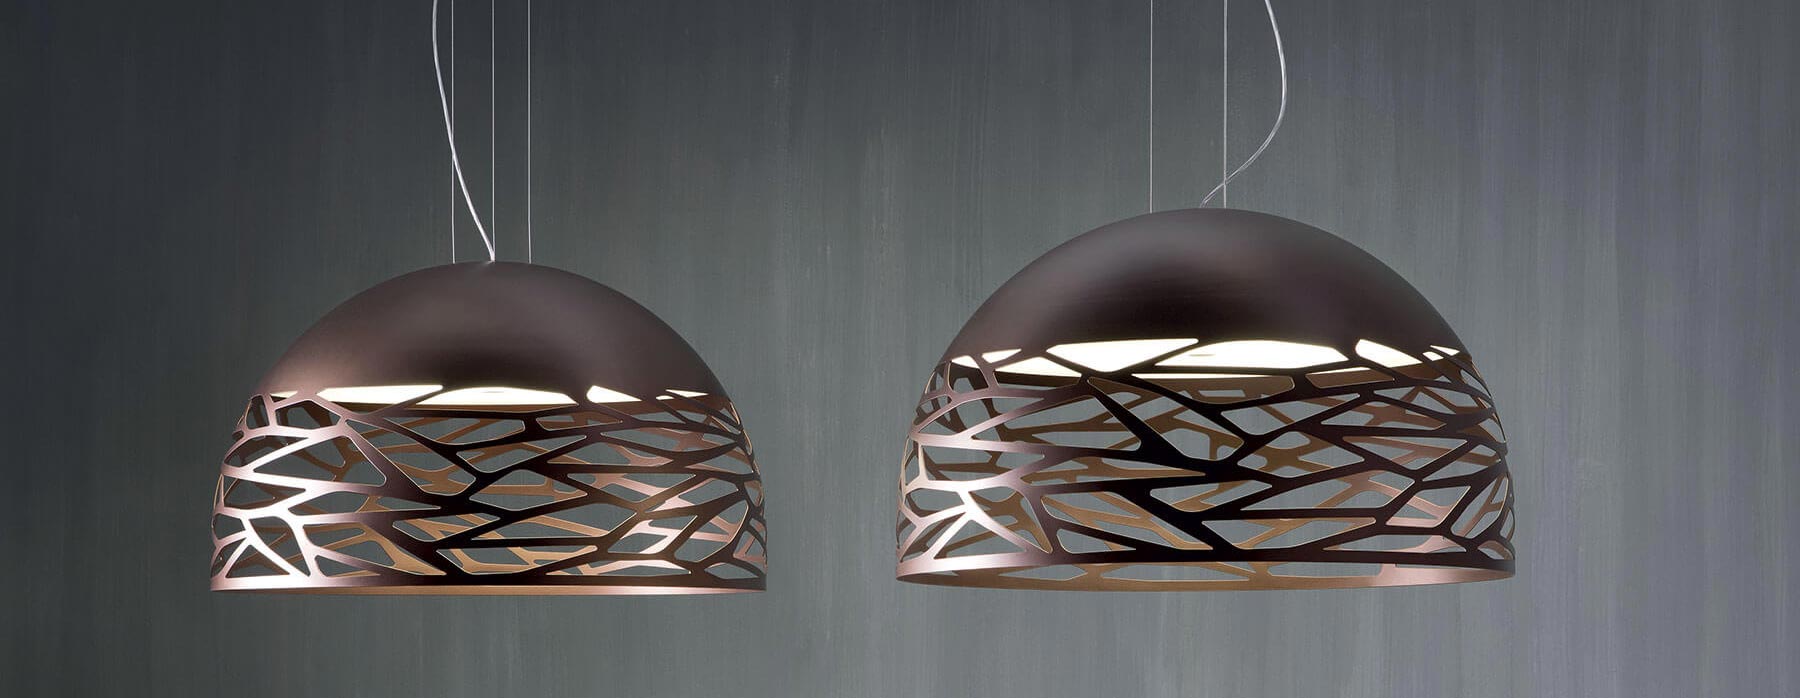 Kelly Pendant Light by Lodes